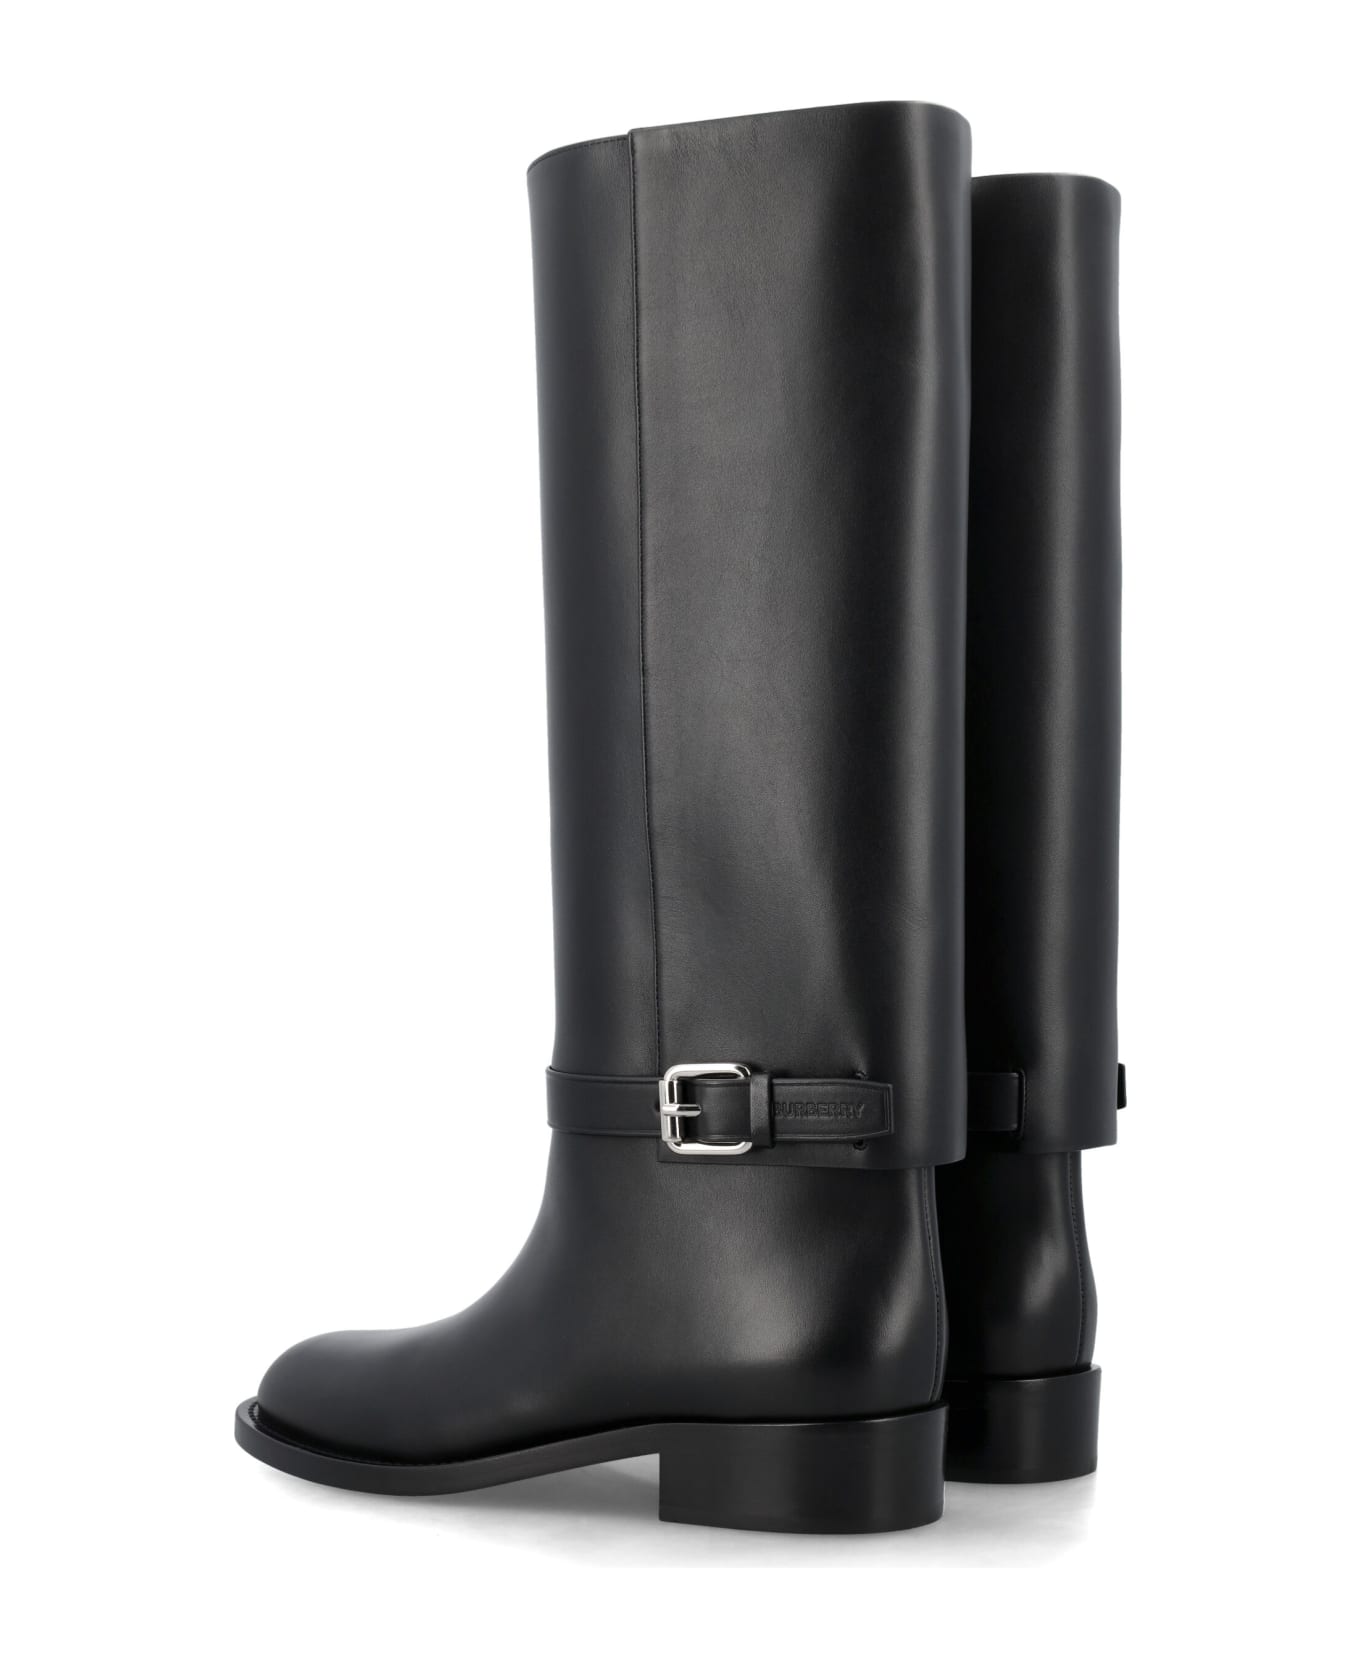 Burberry London Leather Horse Boots - BLACK ブーツ